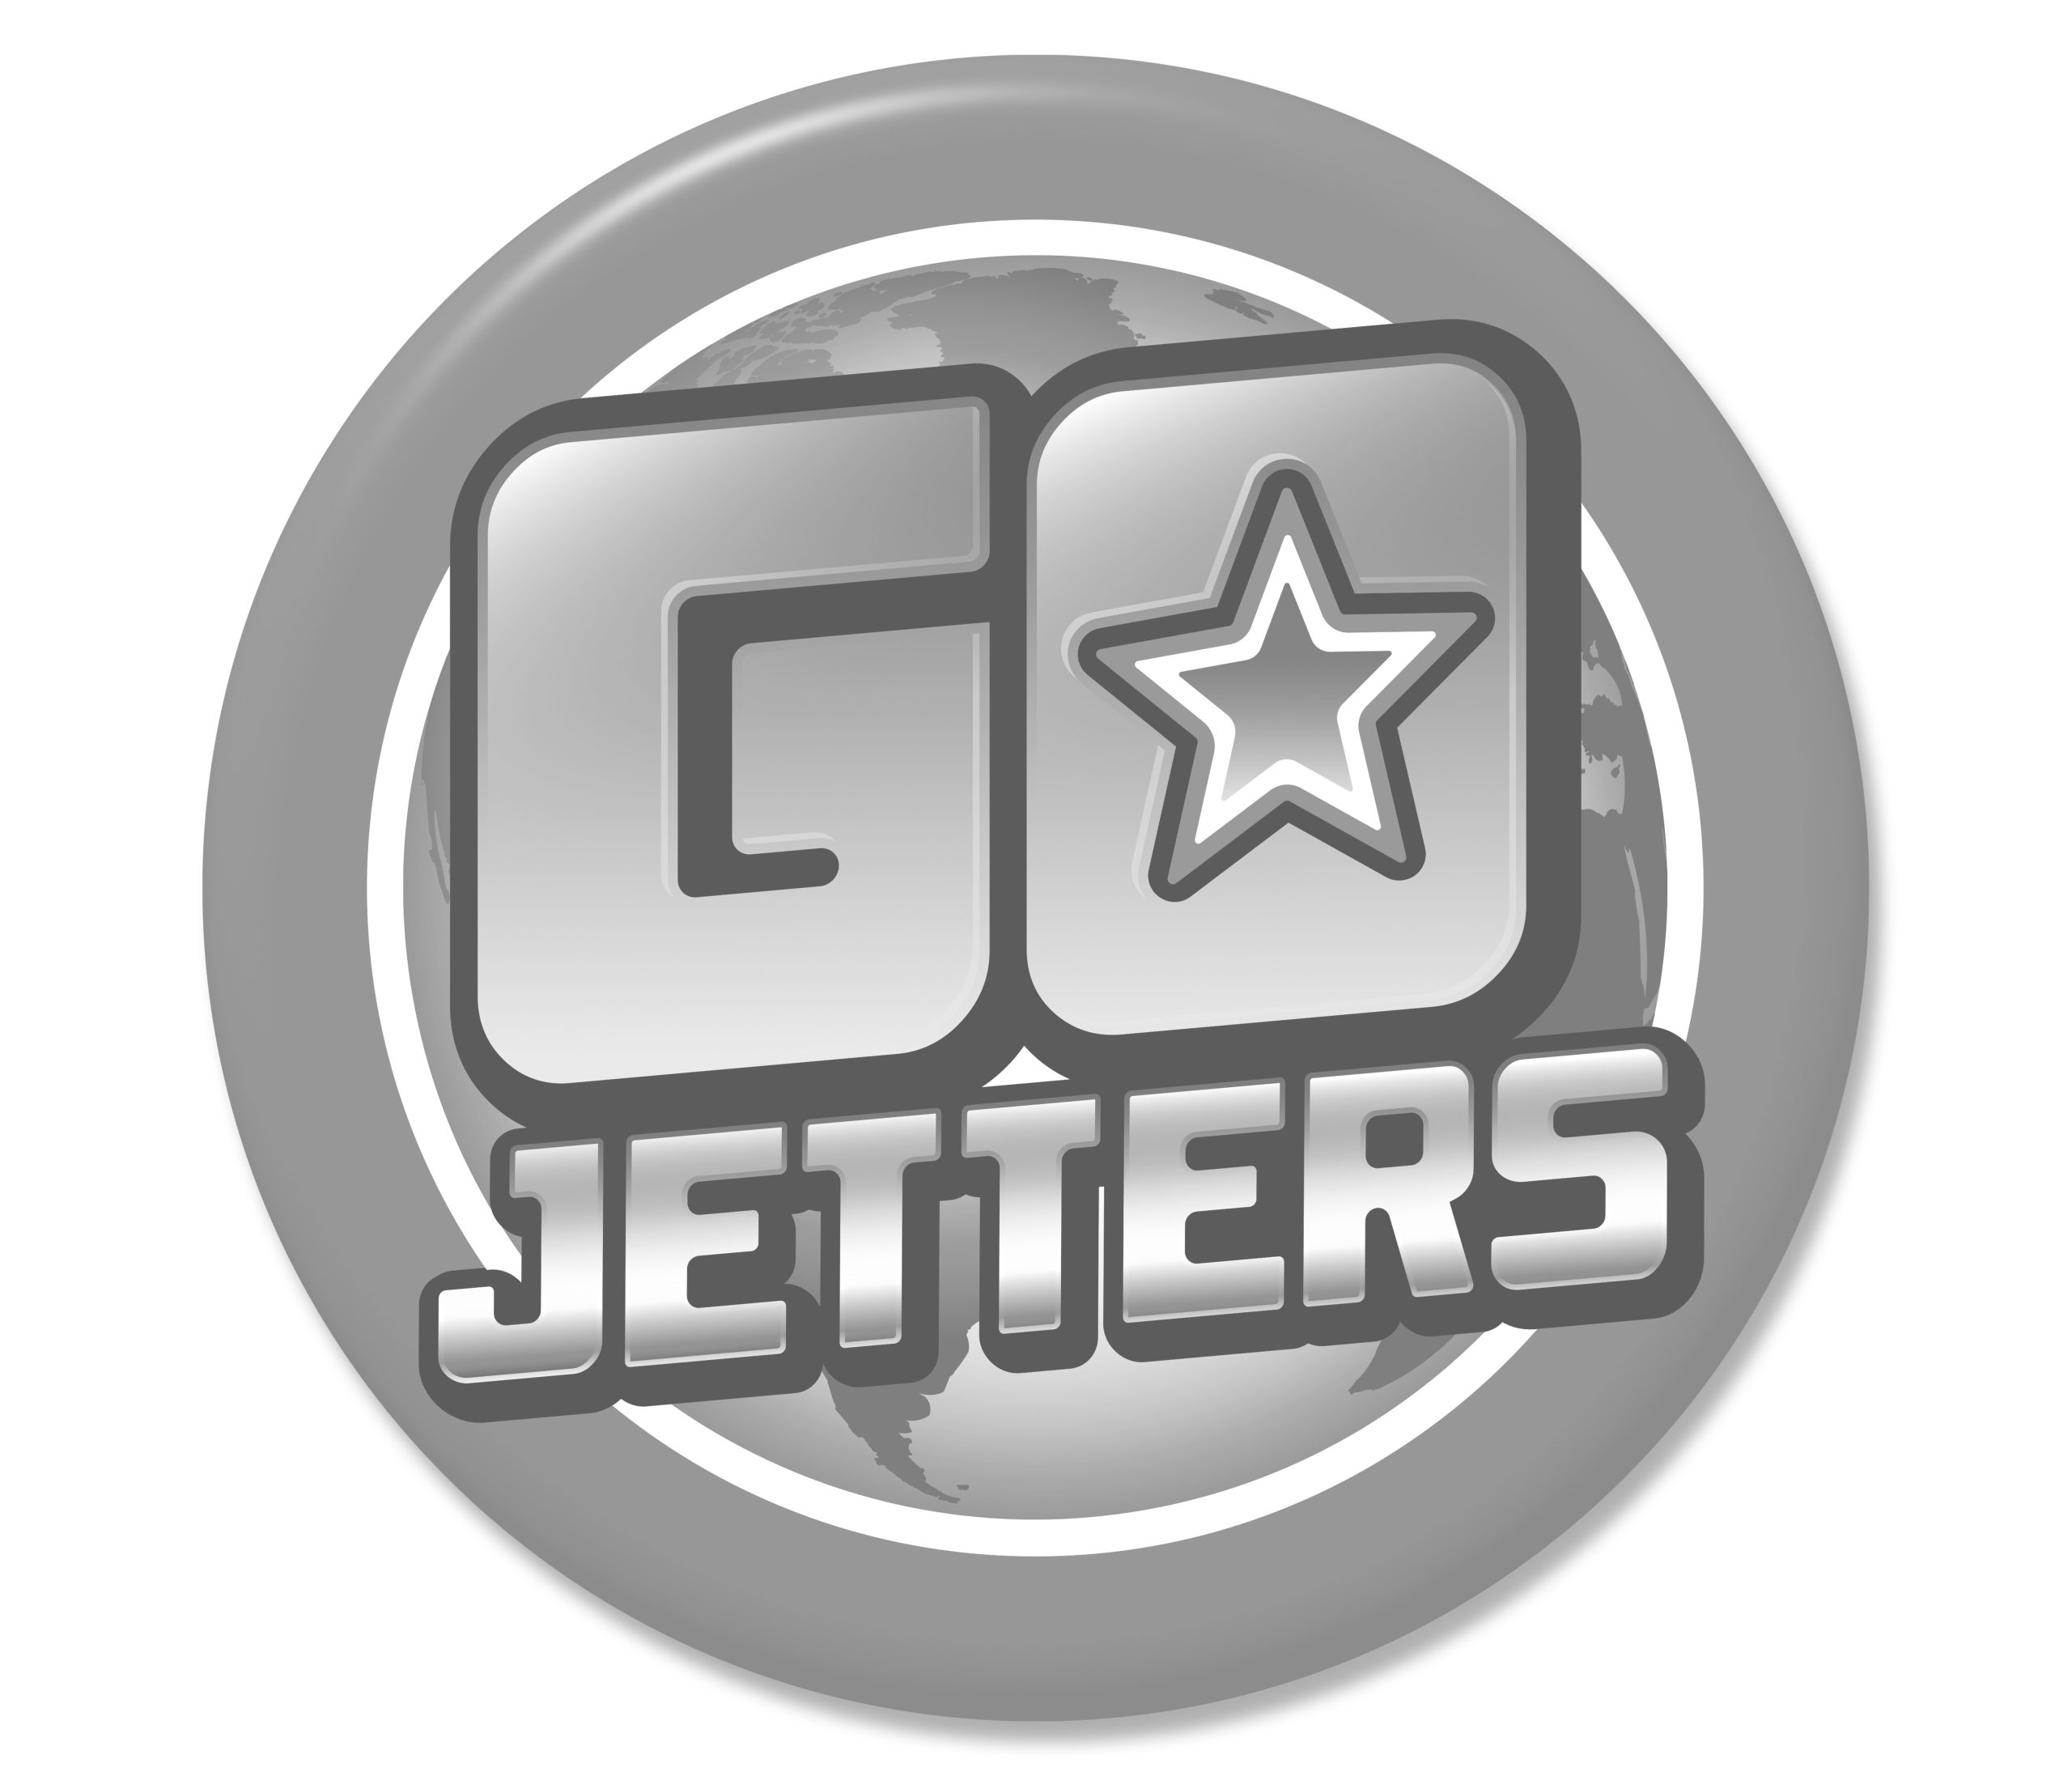 go jetters